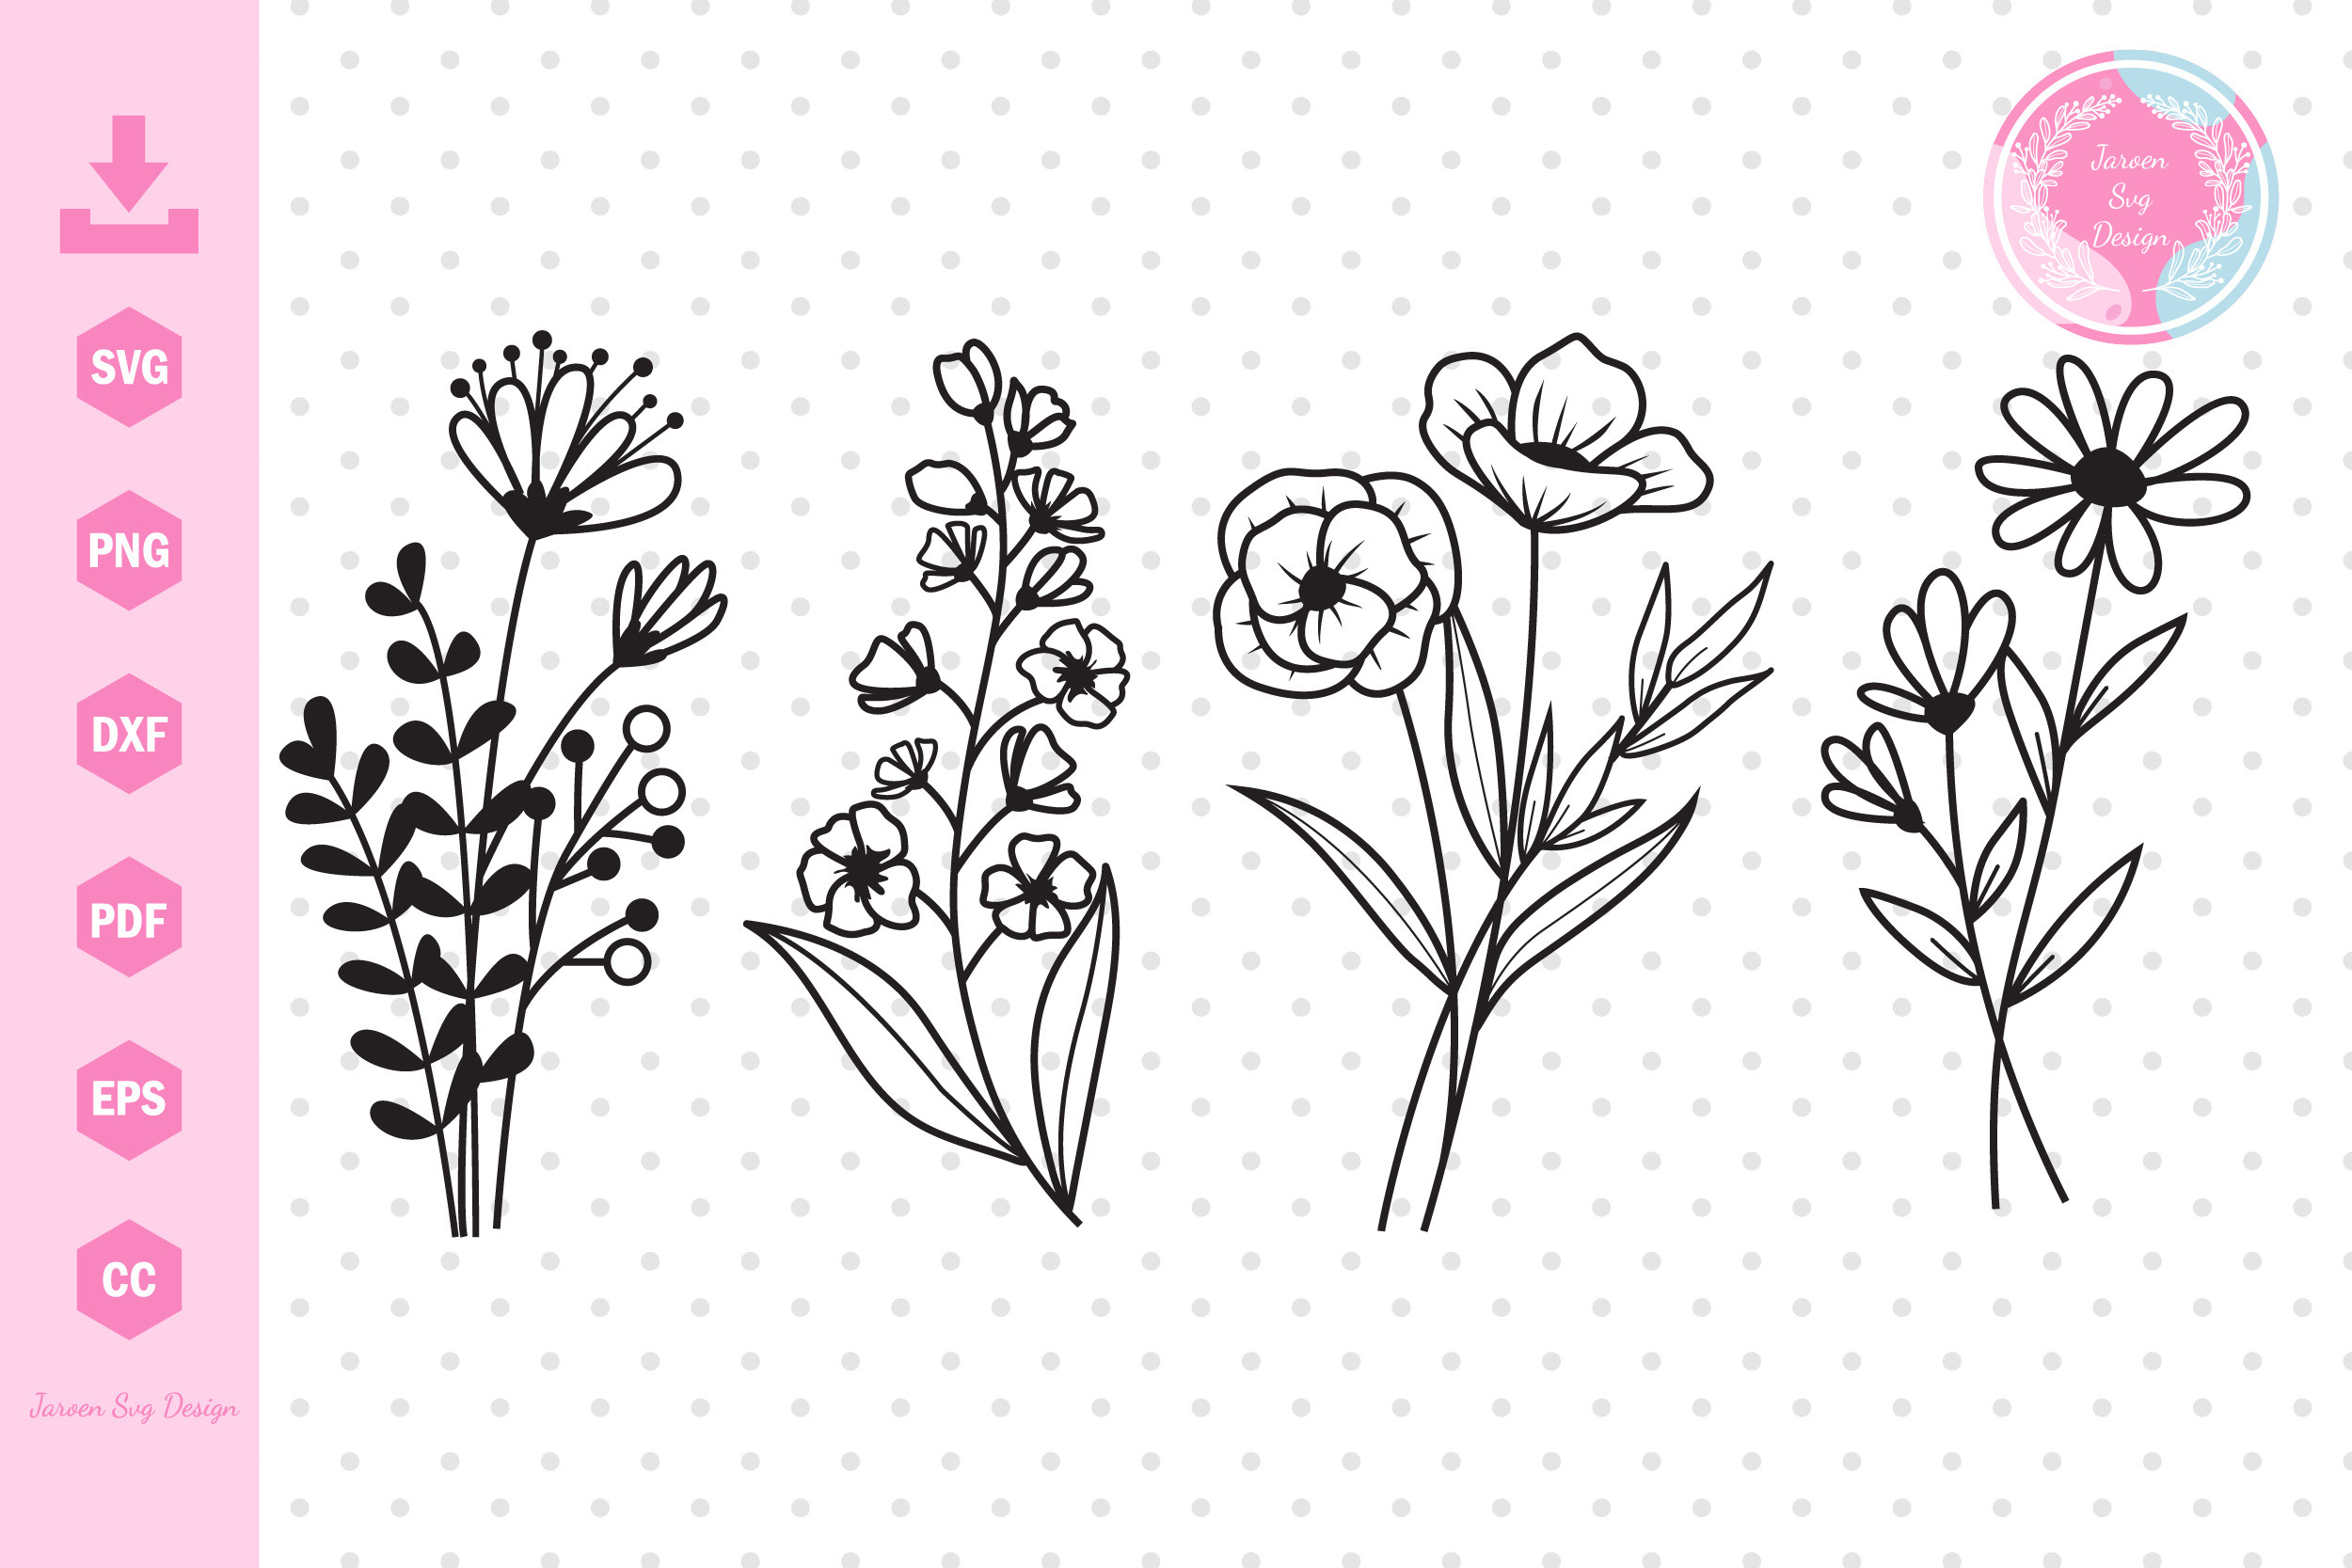 Stickers Flowers 10 Pcs Graphic by DesignHelen · Creative Fabrica